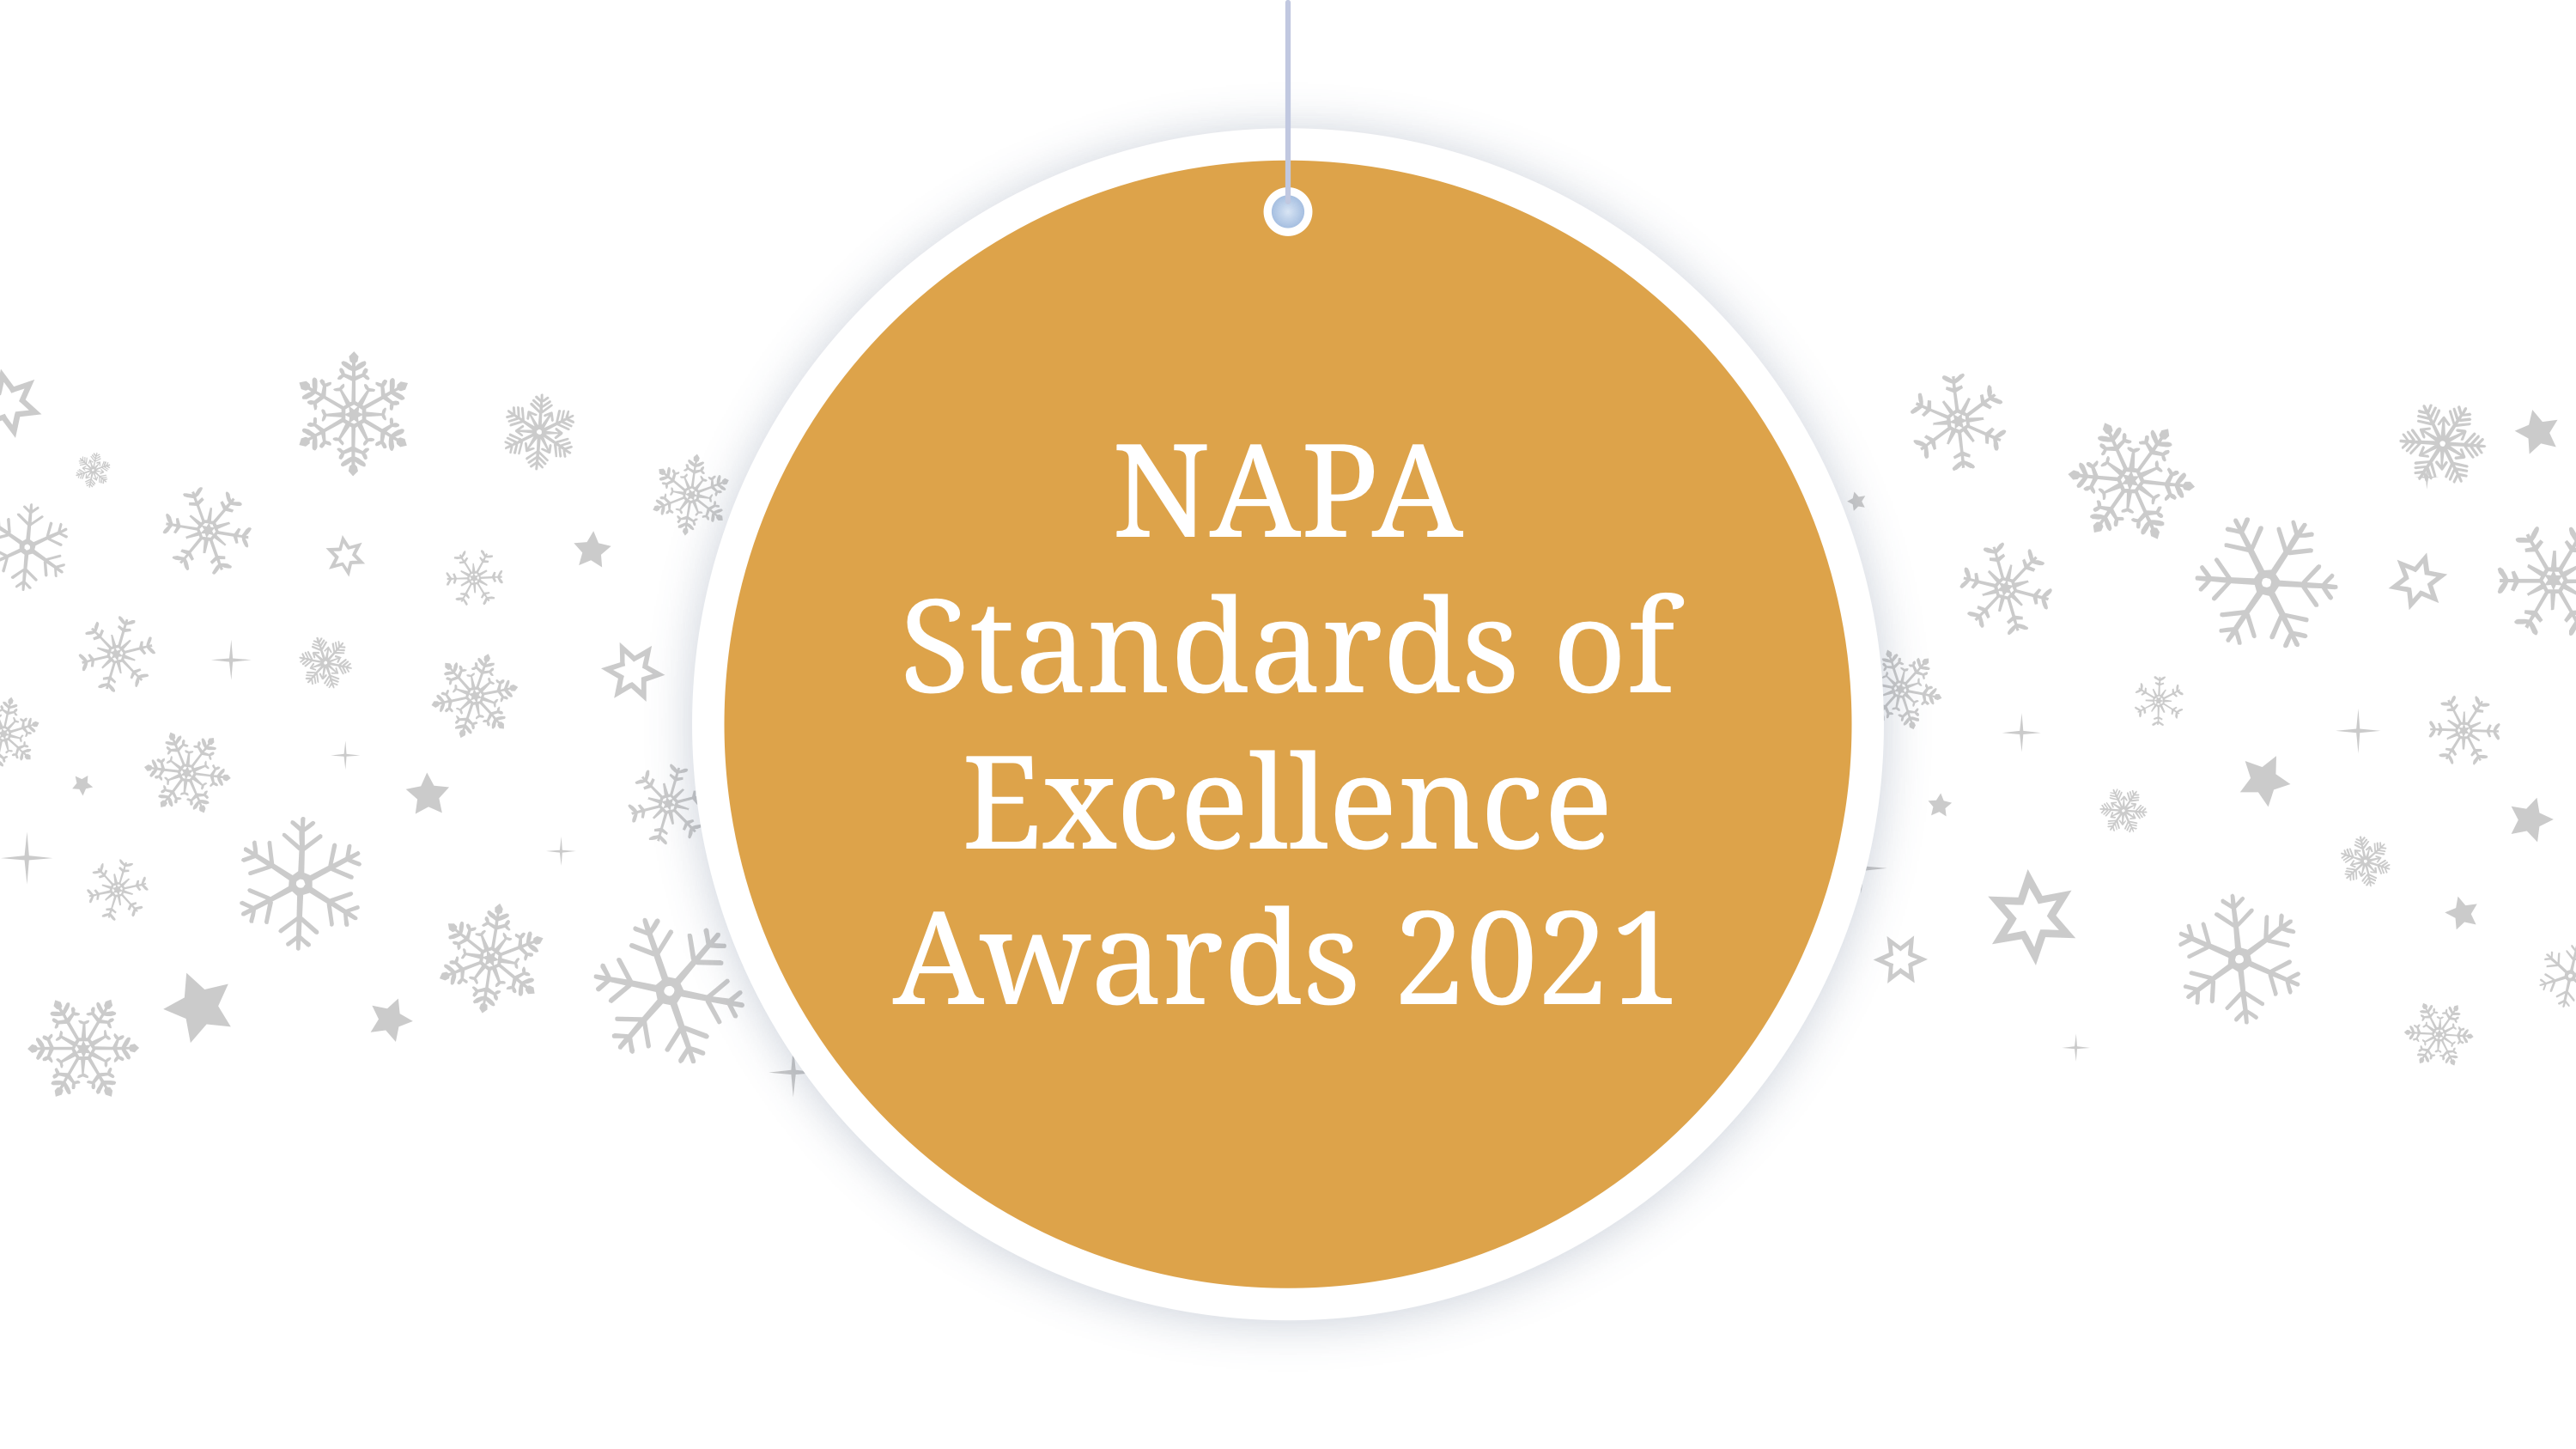 NAPA Standards of Excellence Awards 2021